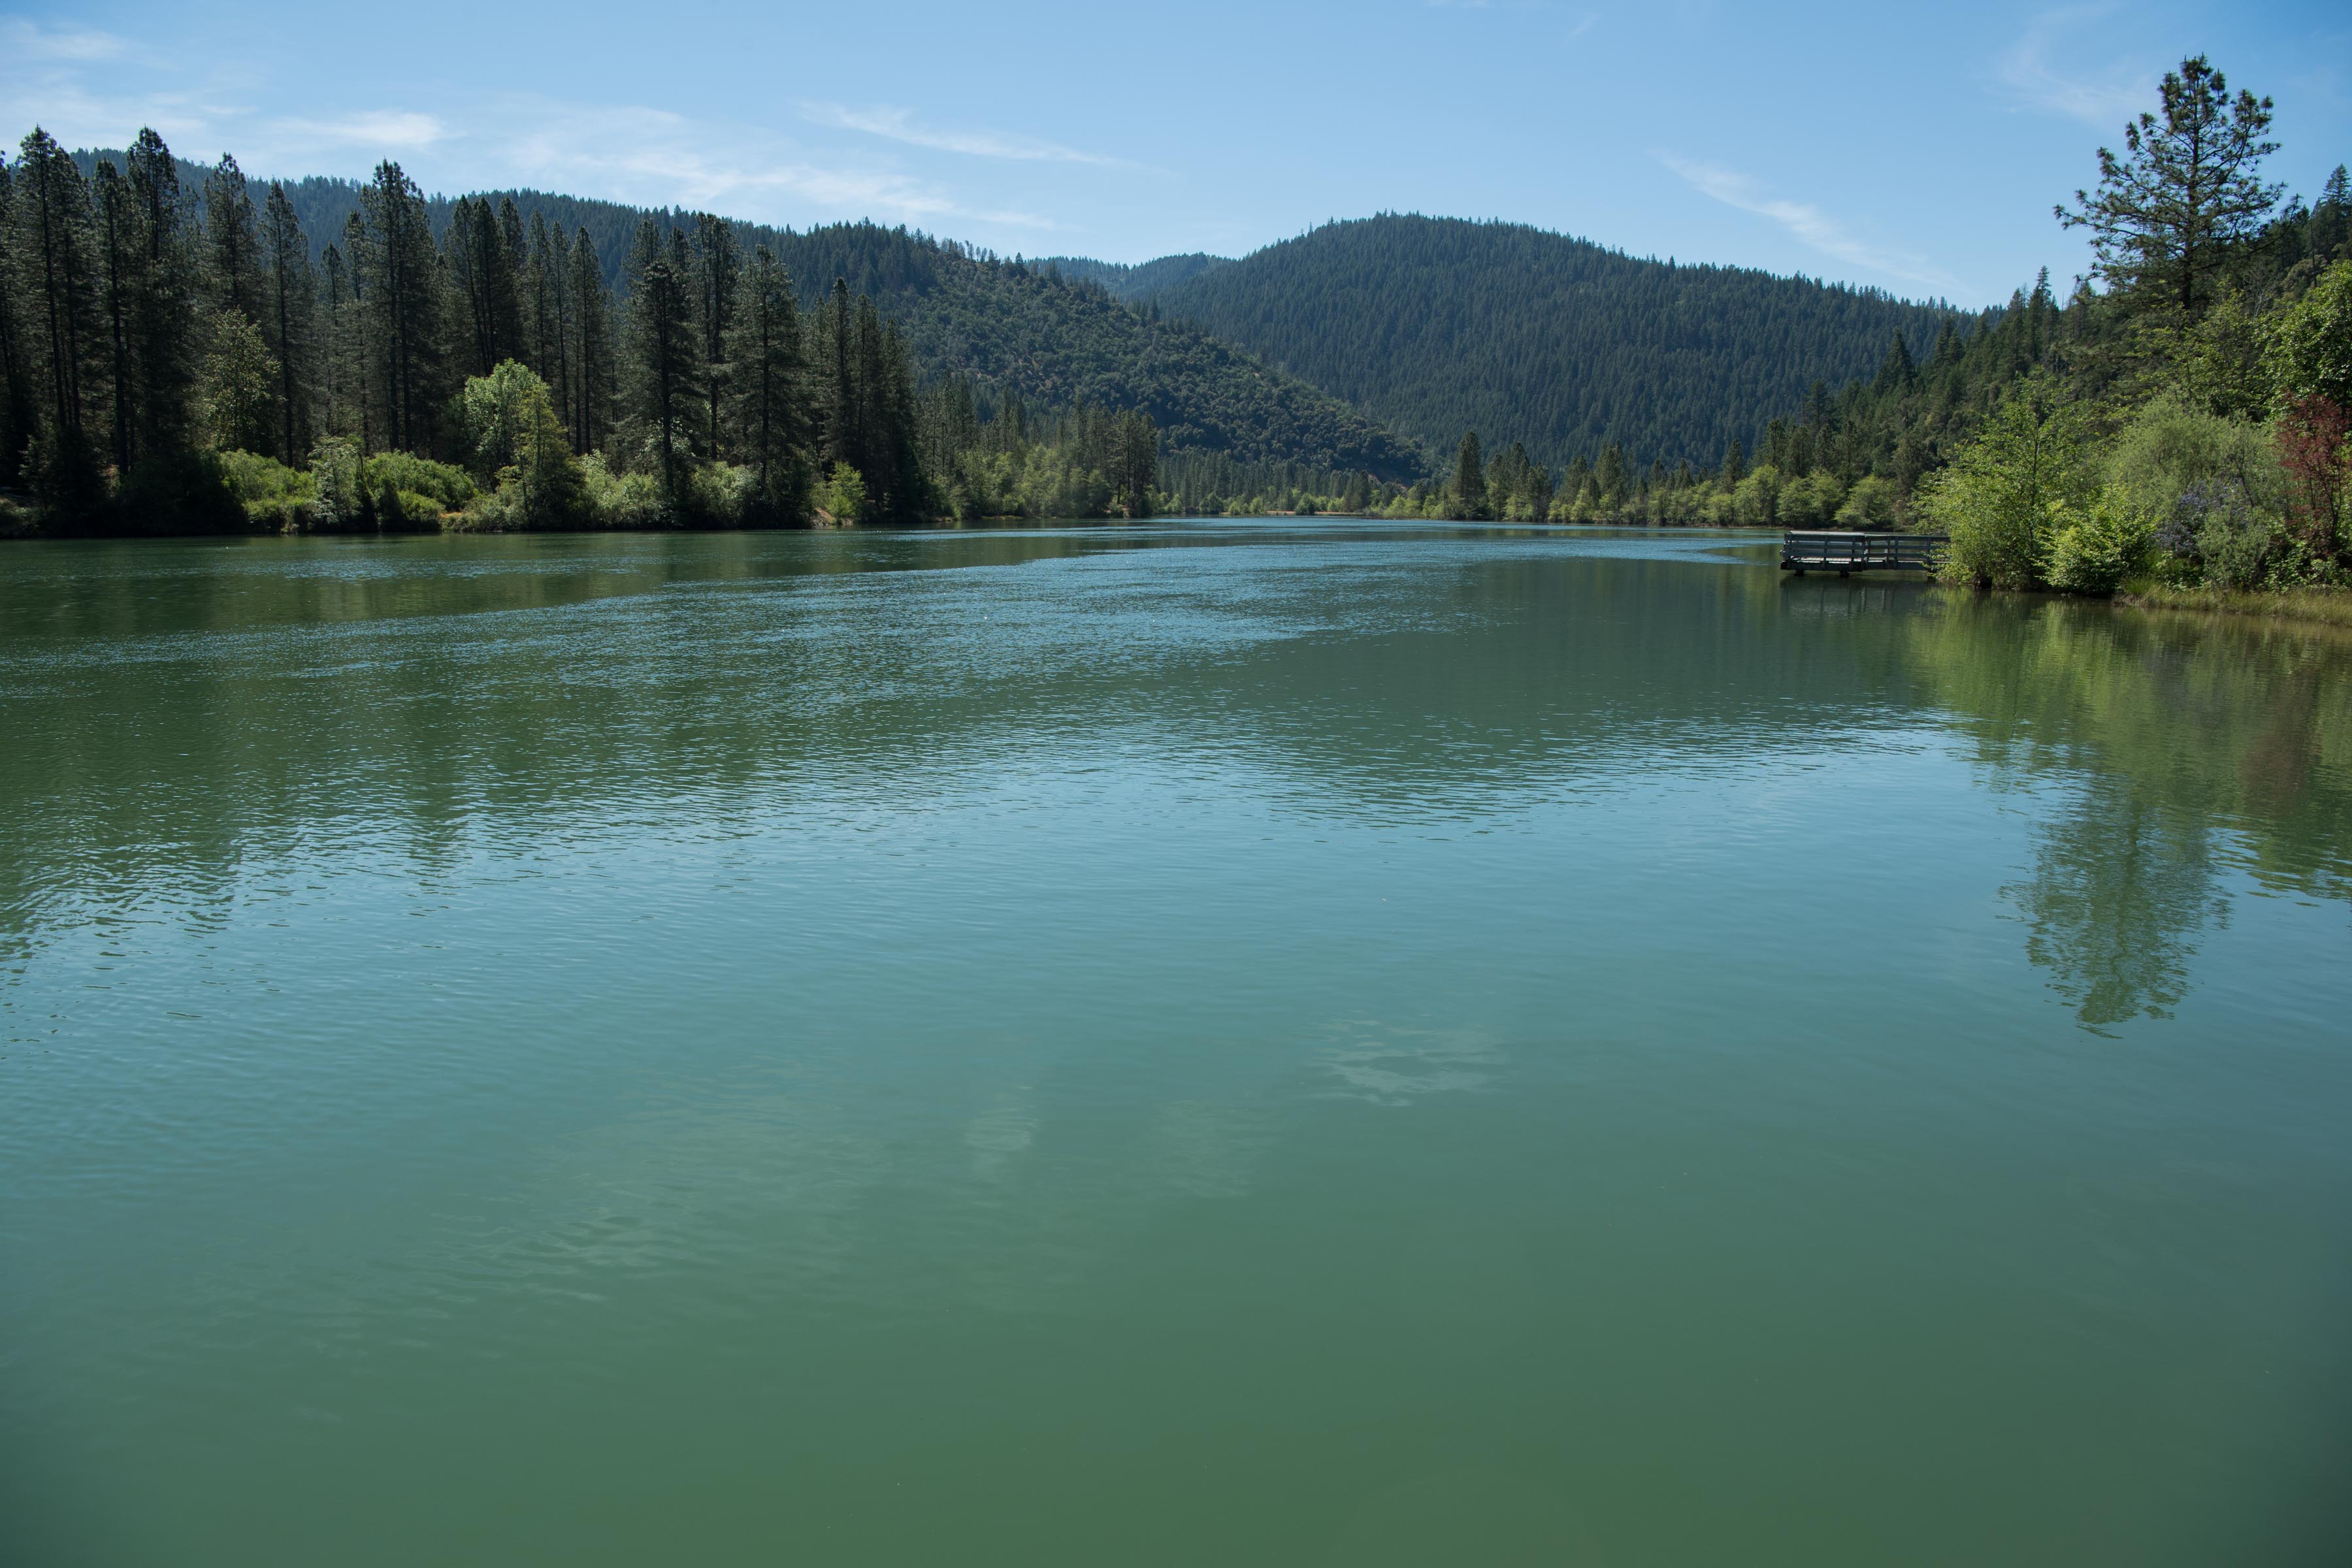 Research studies on the Trinity River in California are included in the projects receiving technical assistance from Reclamation.